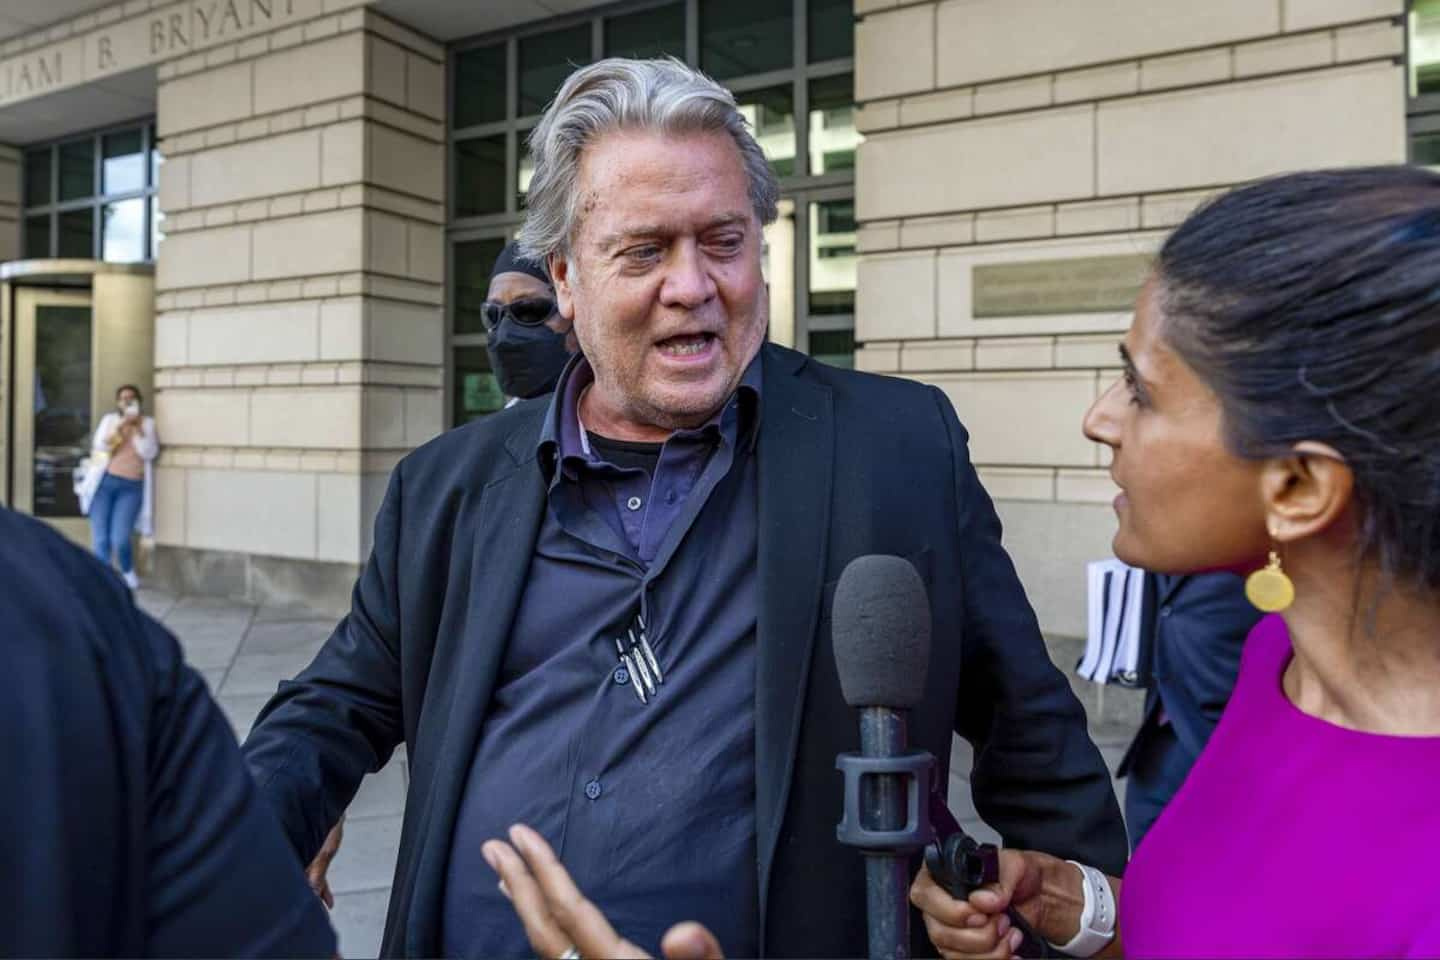 Steve Bannon, ex-adviser to Trump, accused of believing himself “above the law” during his trial